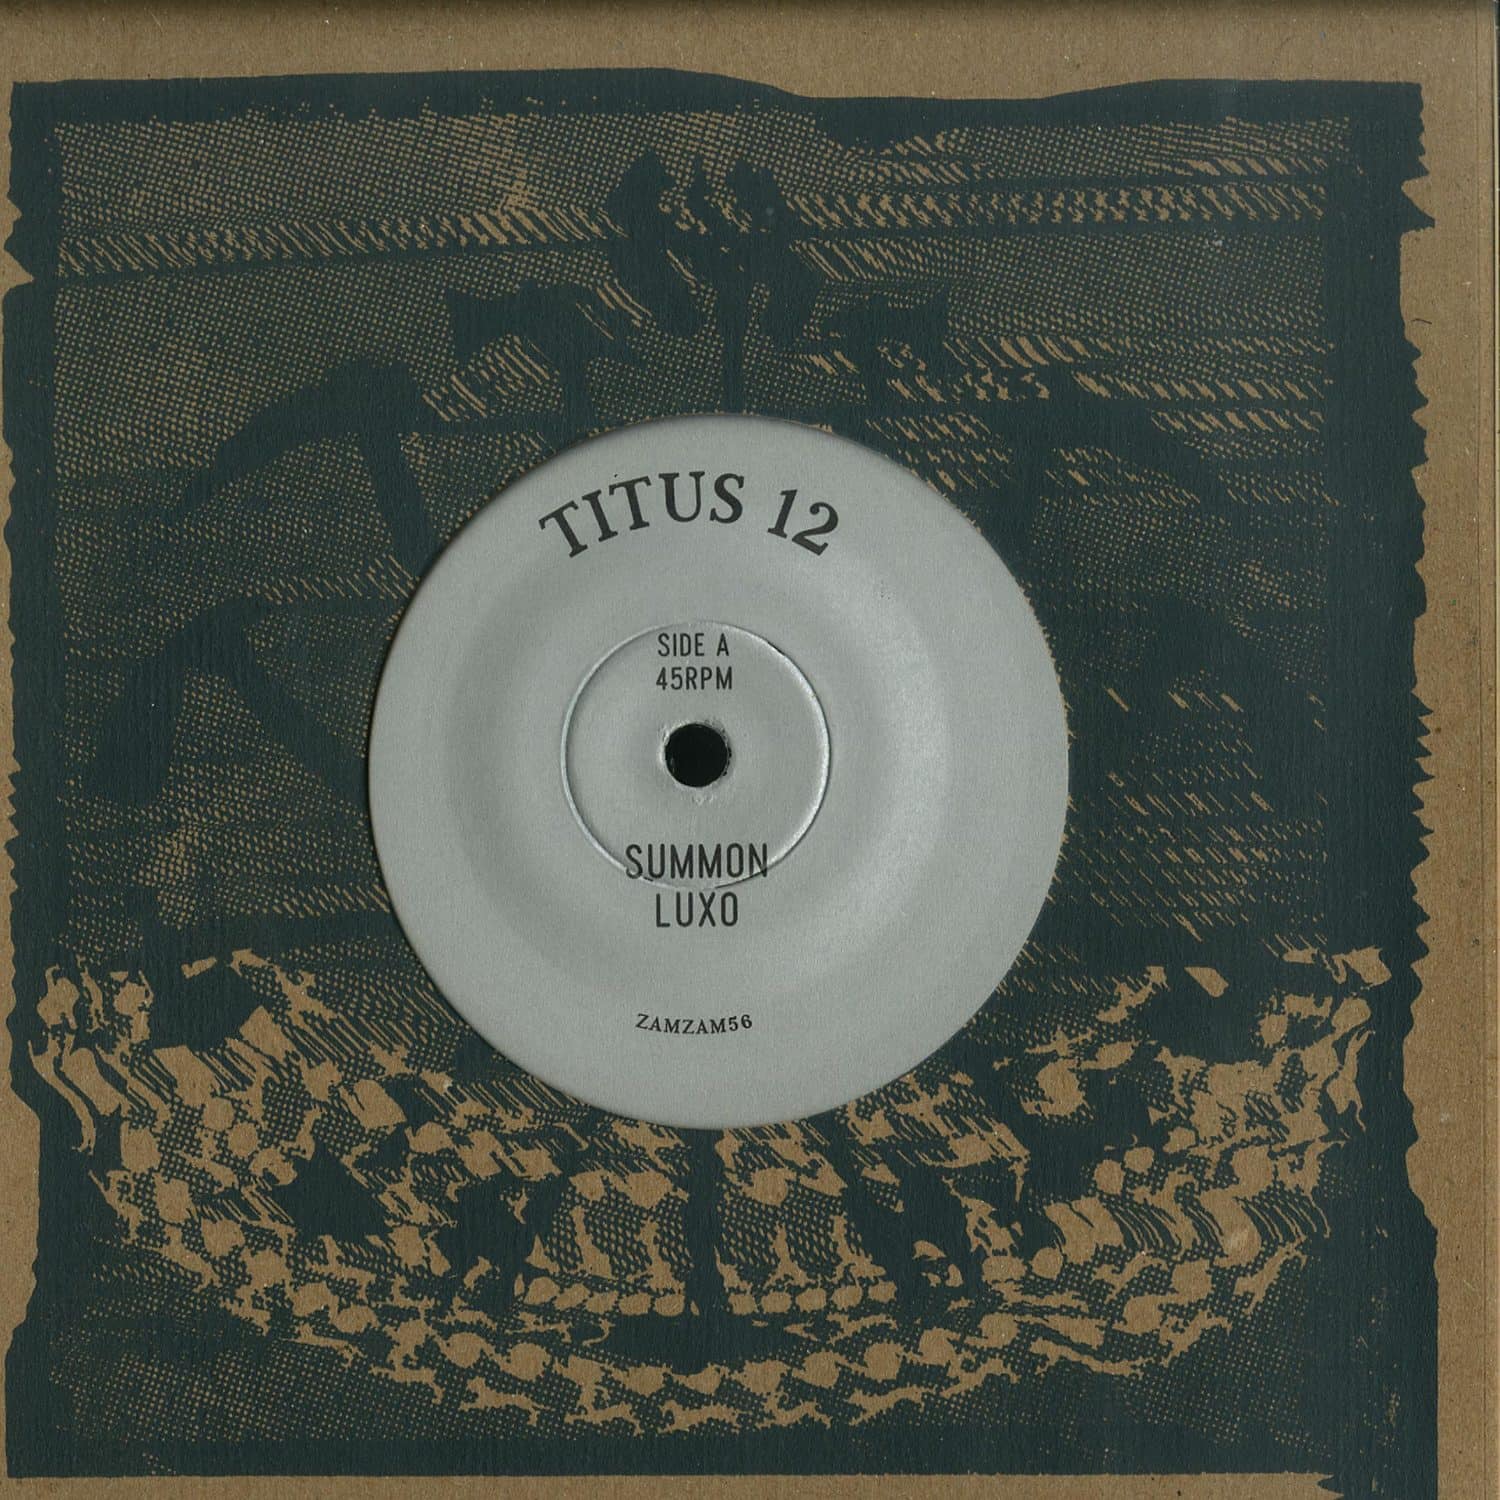 Titus 12 - SUMMON LUXO / SILLY YOUTH 